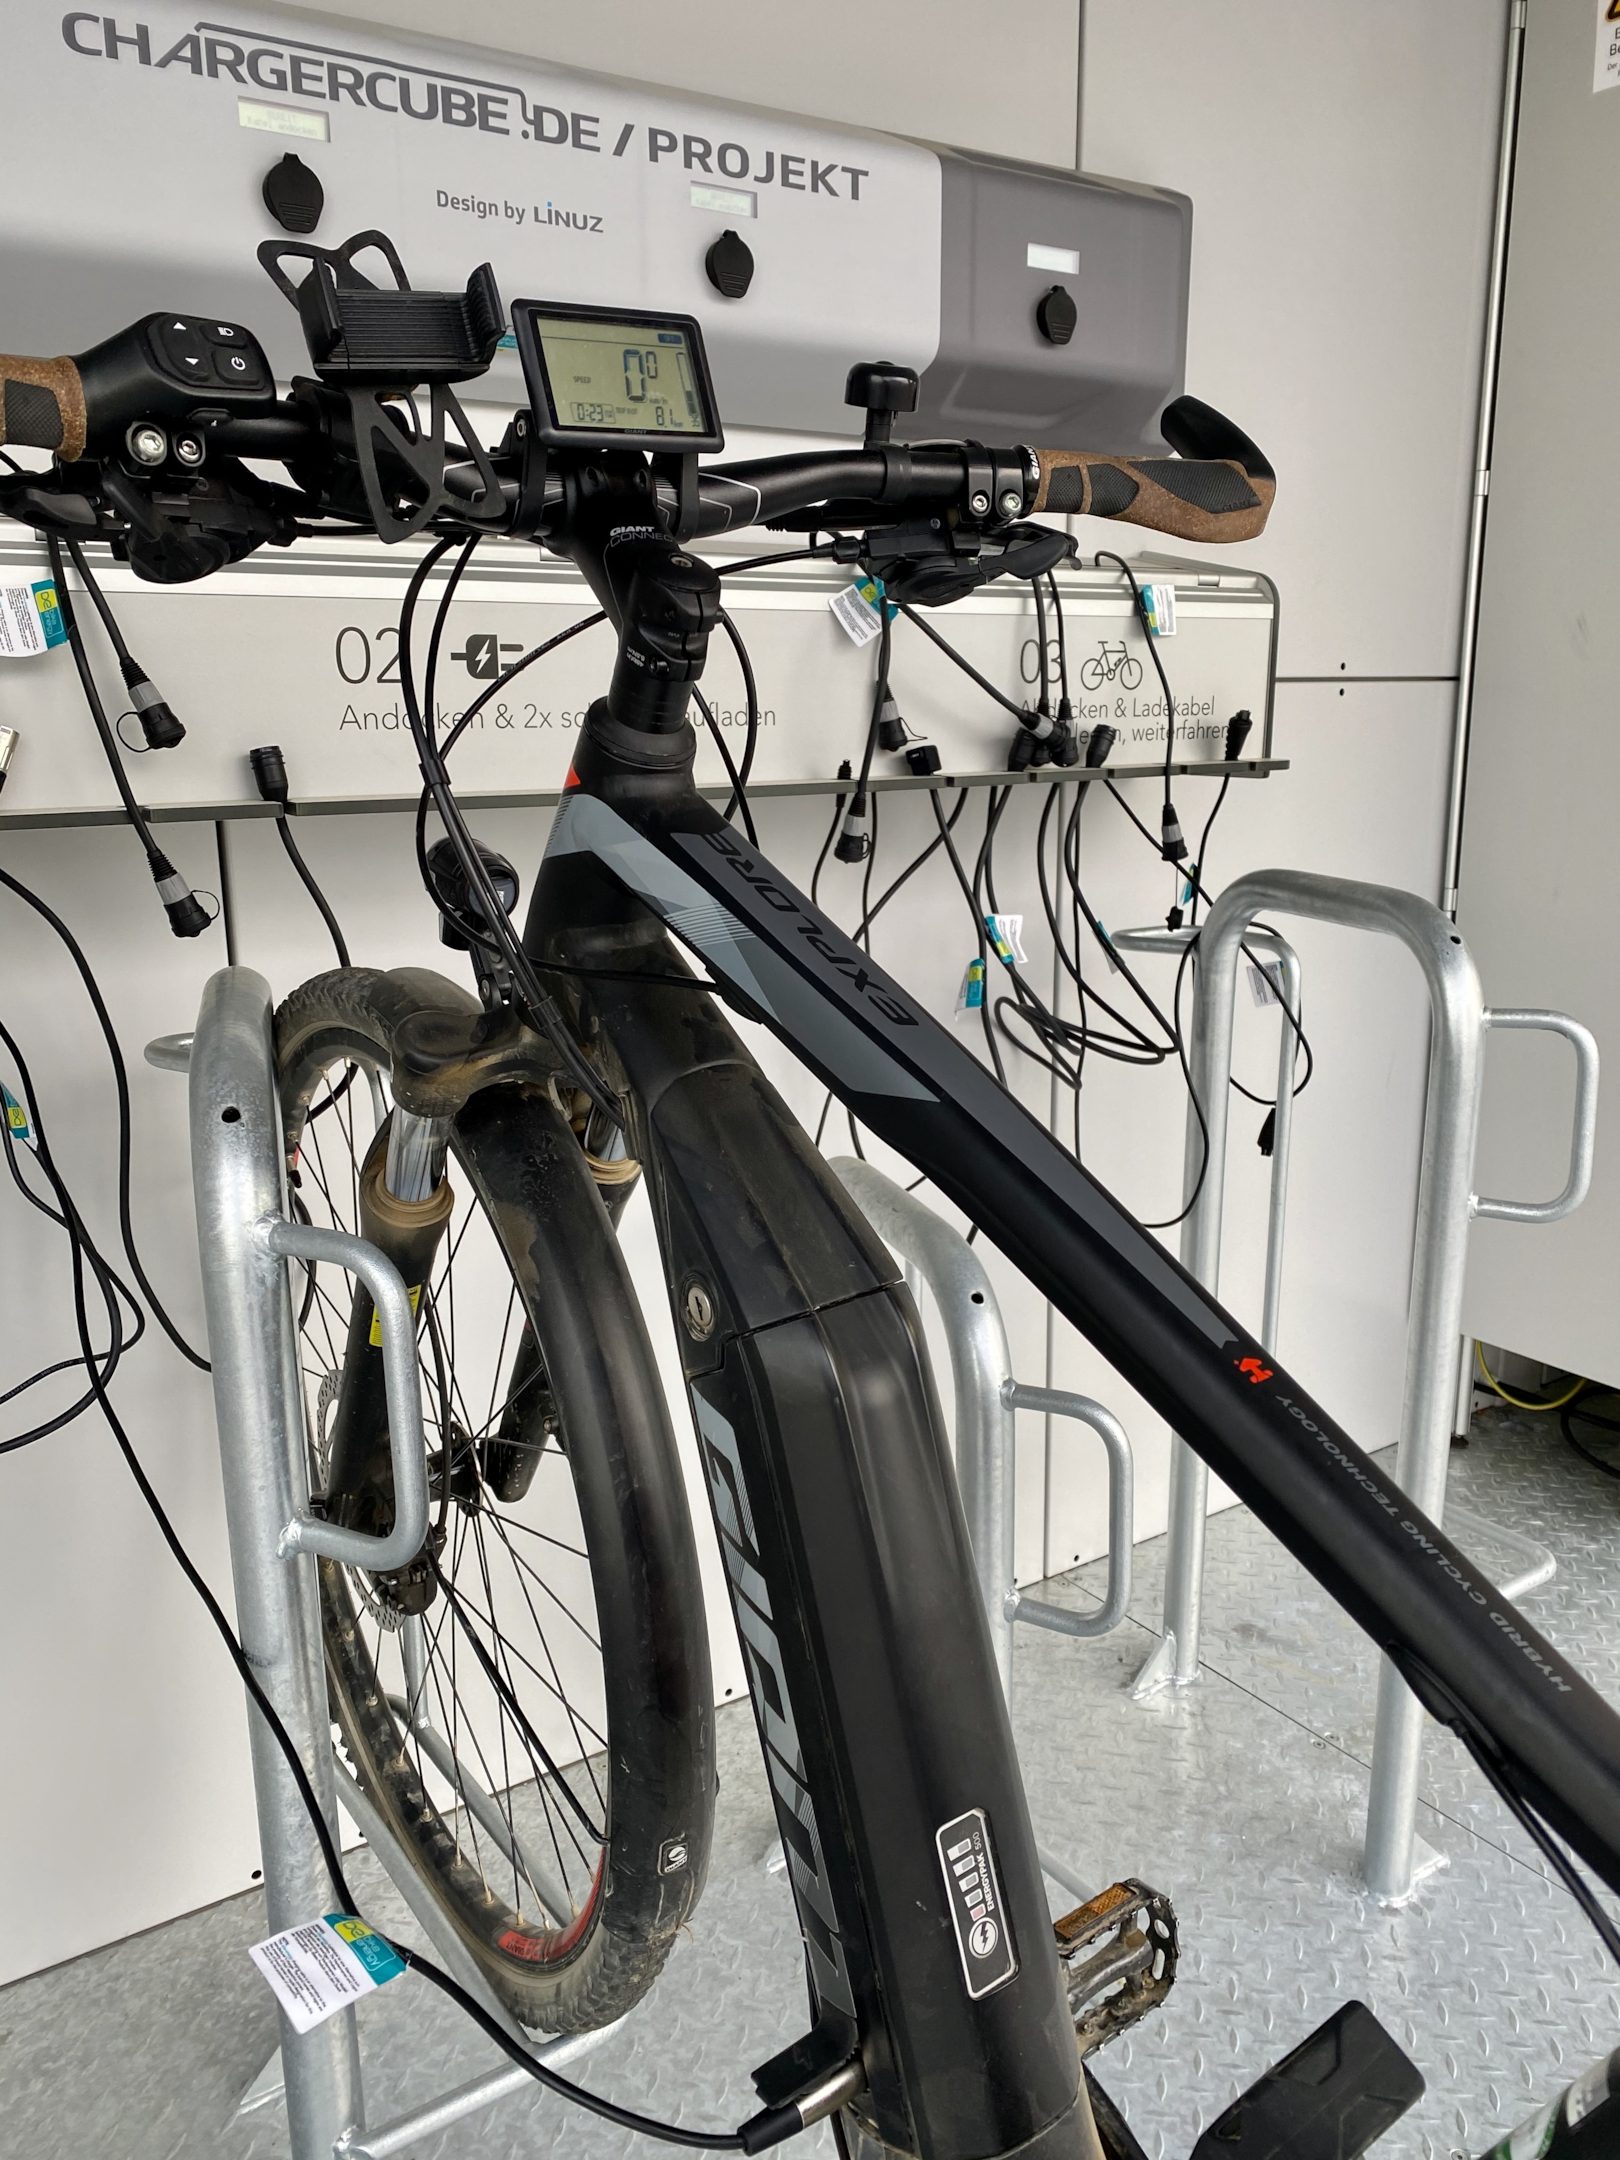 An image showing the ebike charging process with a charger plugged into the bike's battery for efficient charging.